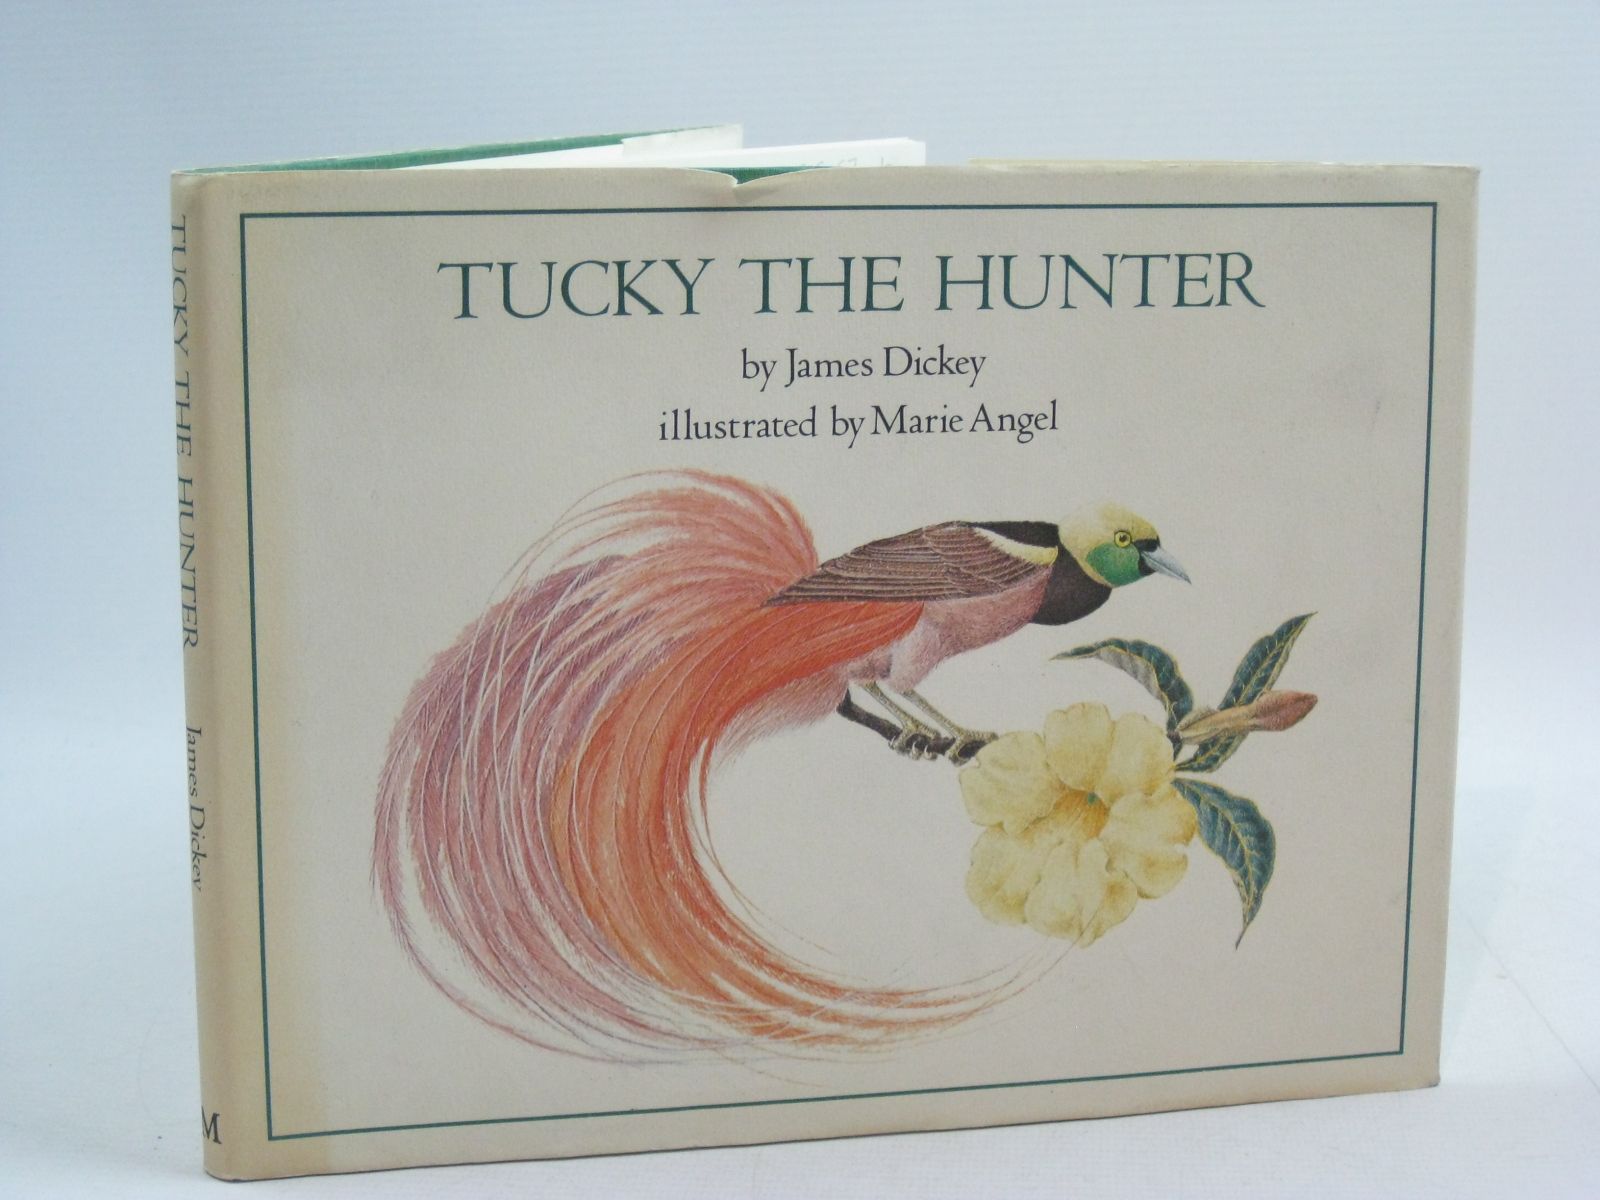 Cover of TUCKY THE HUNTER by James Dickey